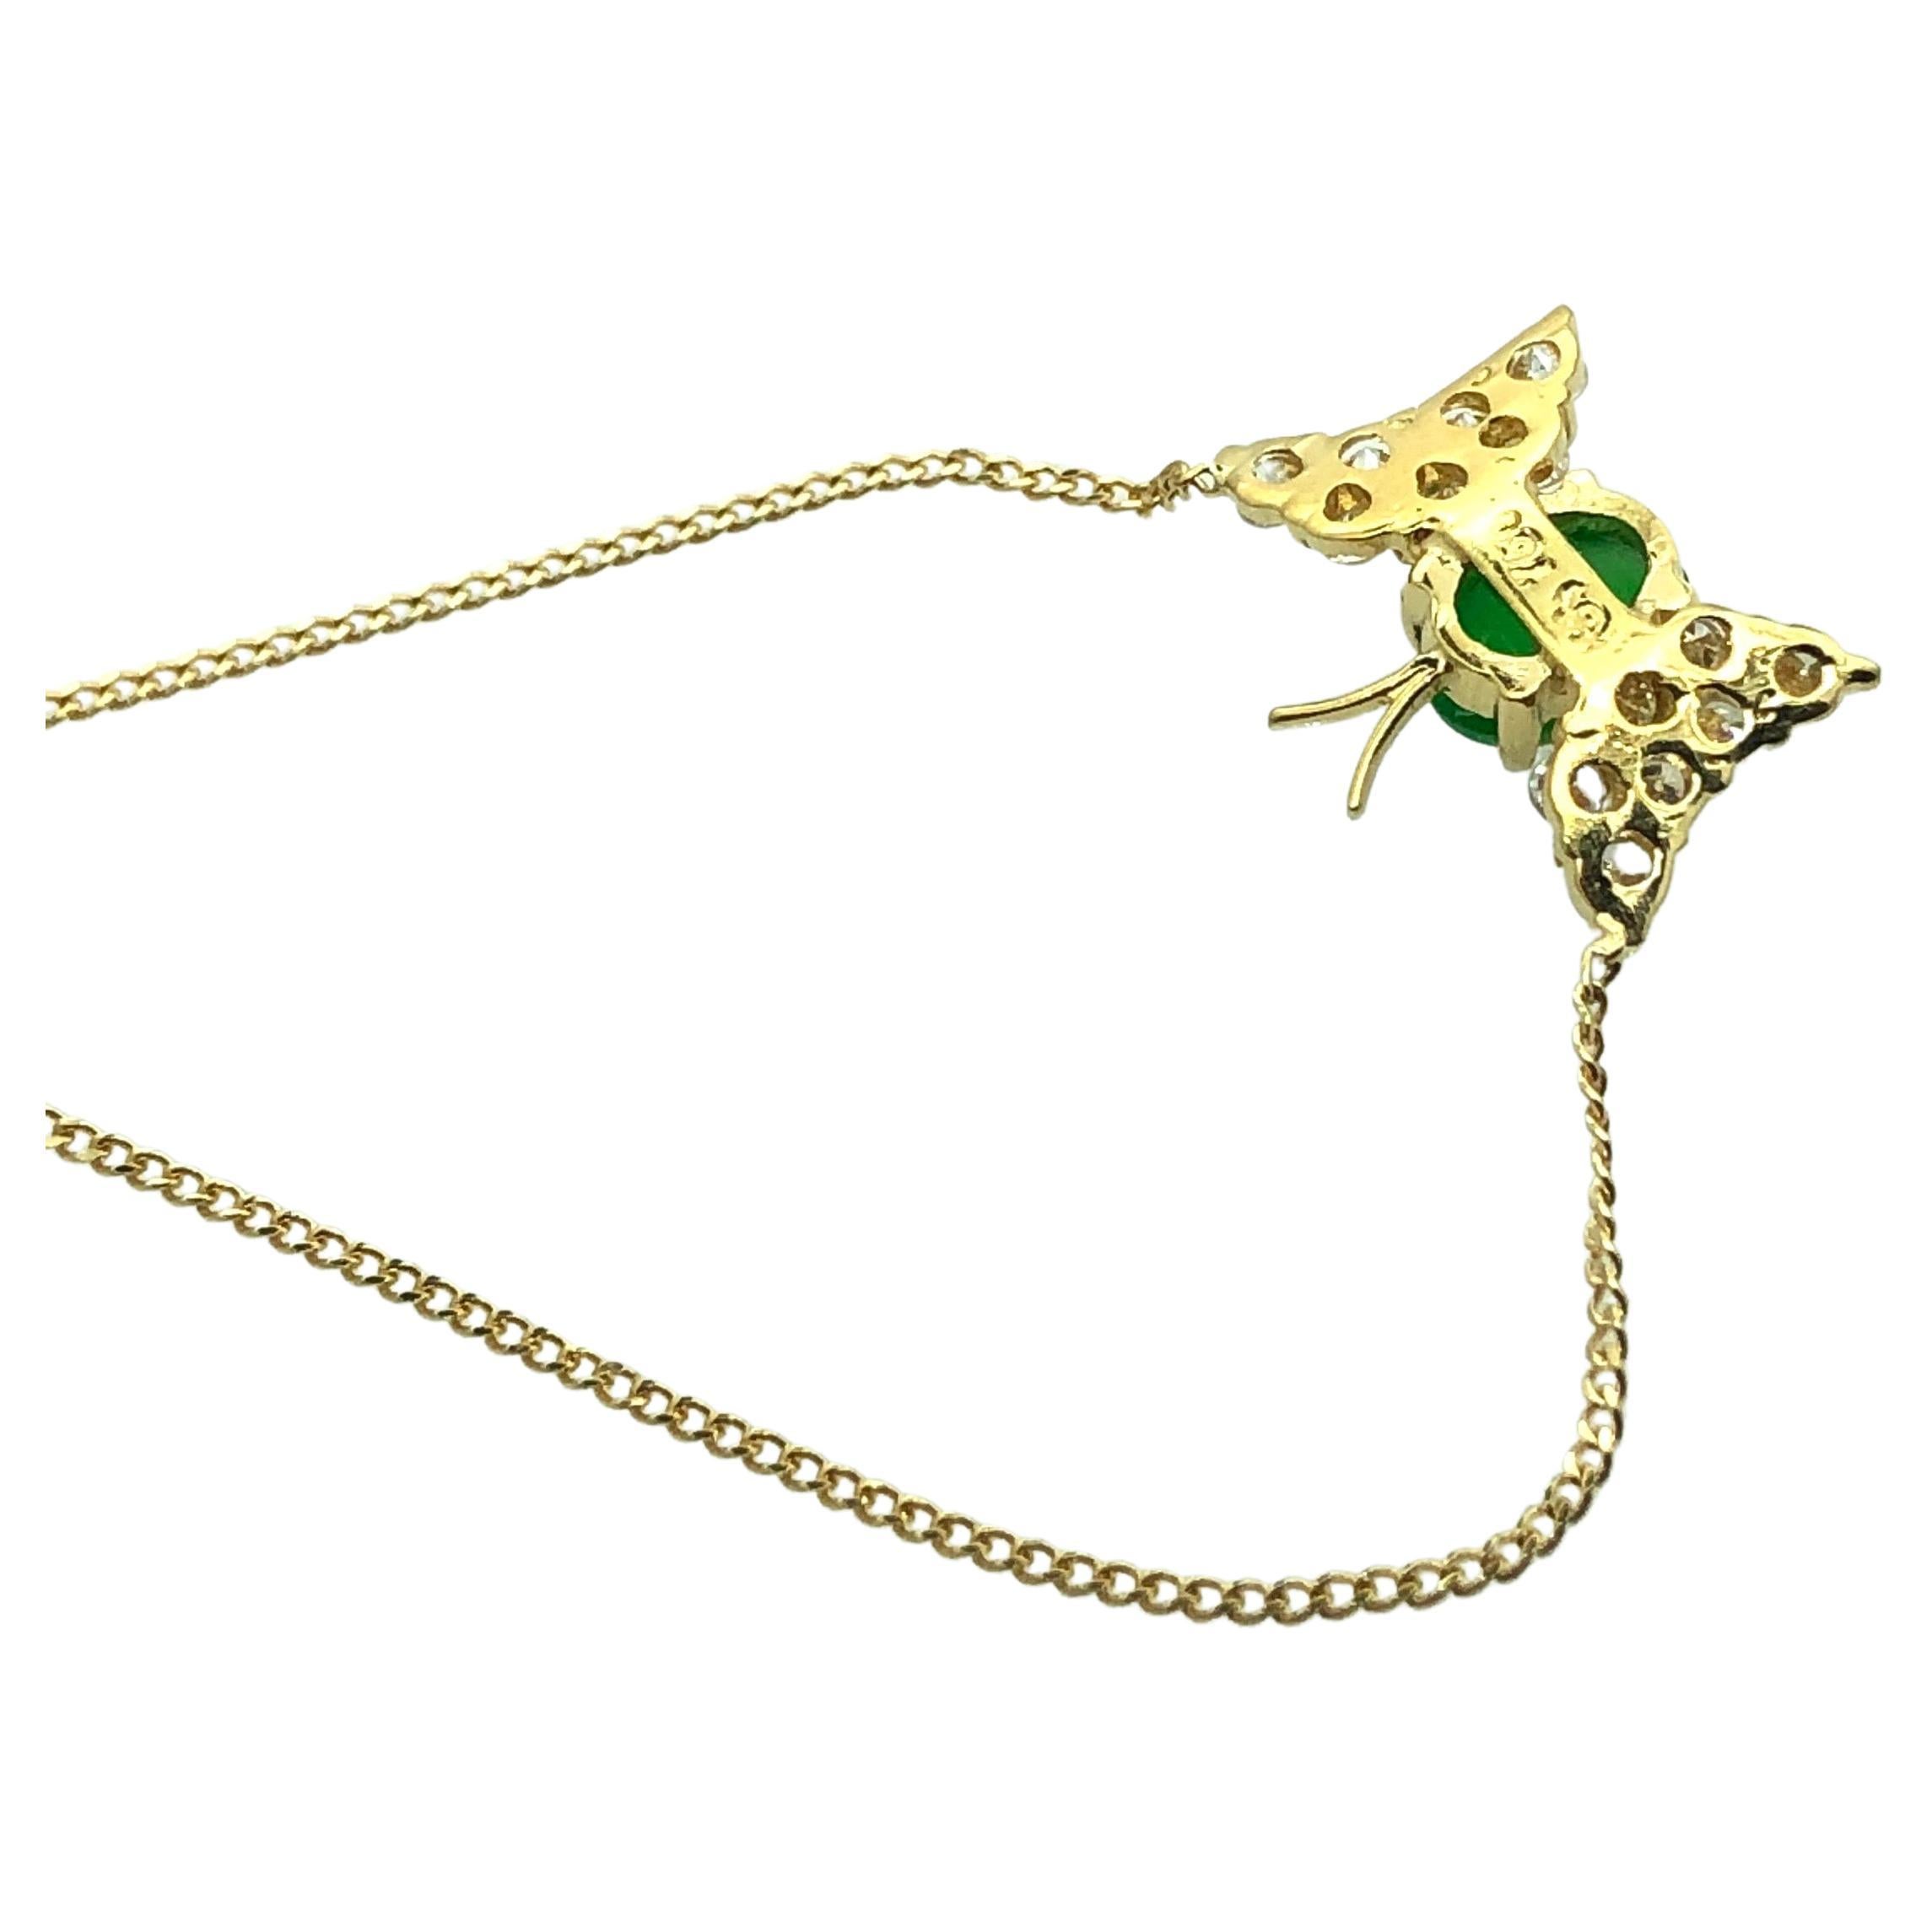 Dainty 18 carat yellow gold Butterfly pendant on 18 carat delicate curb chain.
Butterfly wings are encrusted with 14 brilliant cut diamonds, estimated totalling 0.21 carats.
Butterfly body is set with Jade cabochon, measuring 5.7 mm x 4.00